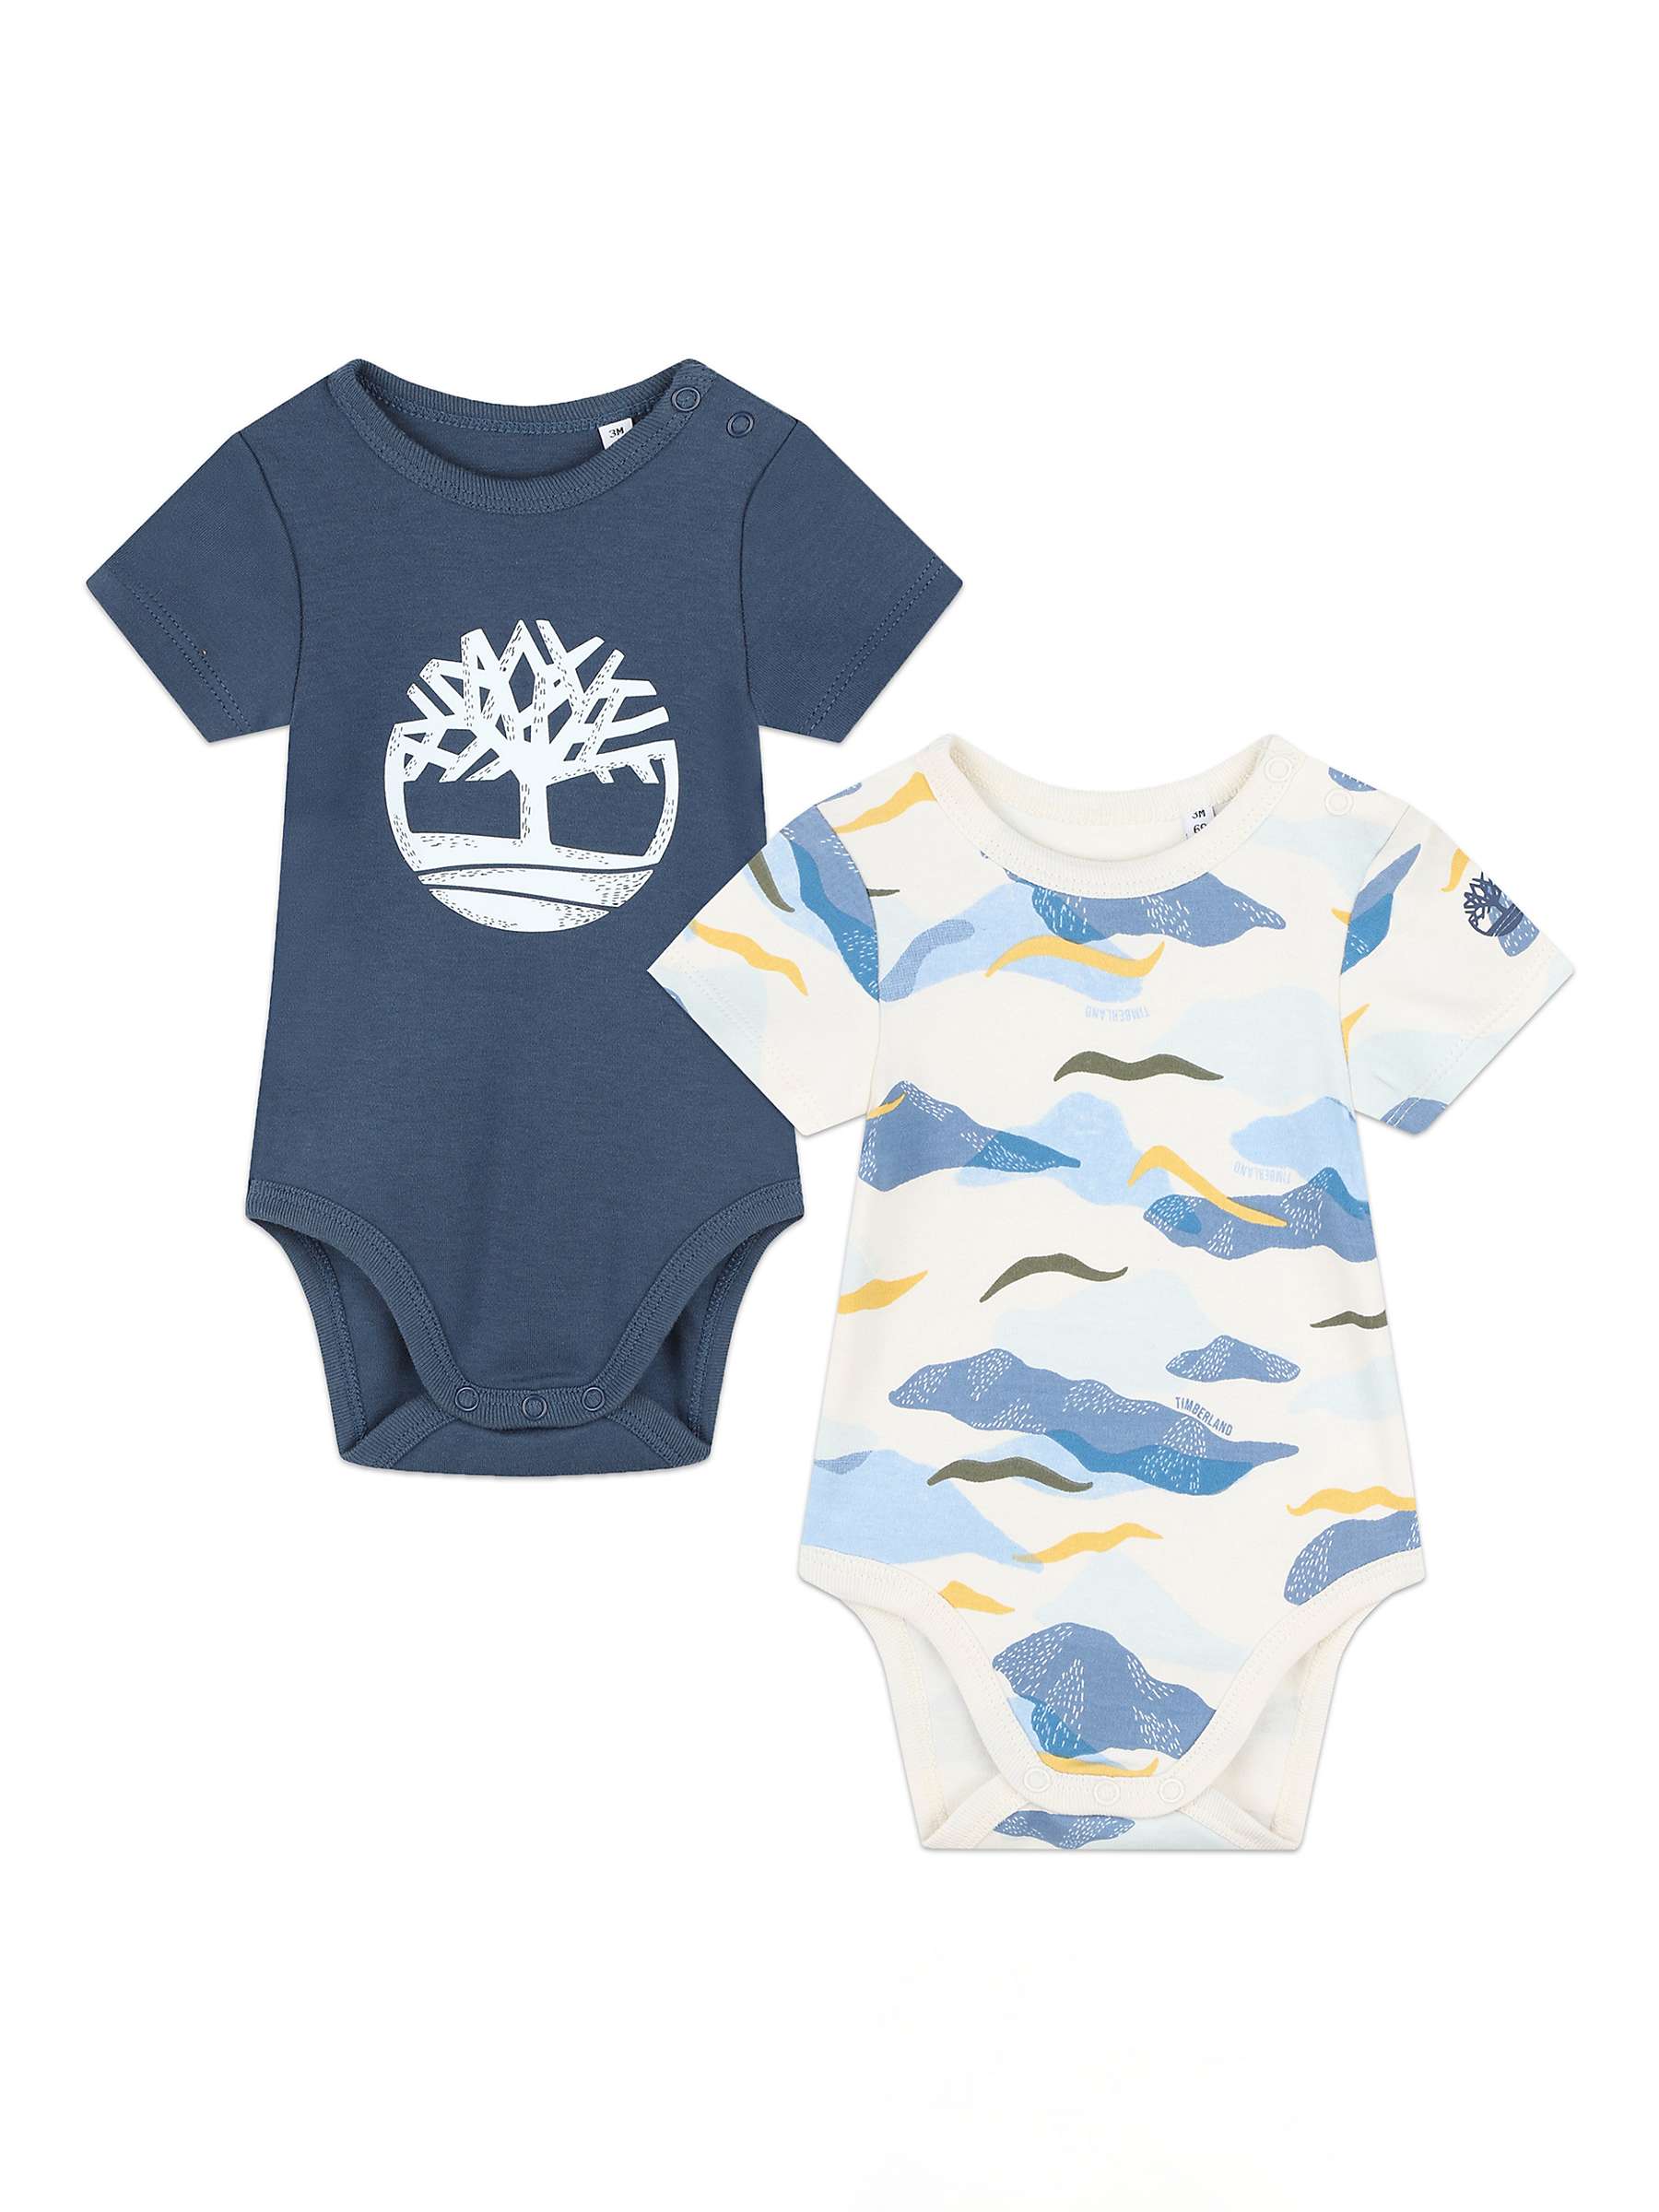 Buy Timberland Baby Logo & Abstract Print Bodysuits, Pack Of 2, Blue/Multi Online at johnlewis.com